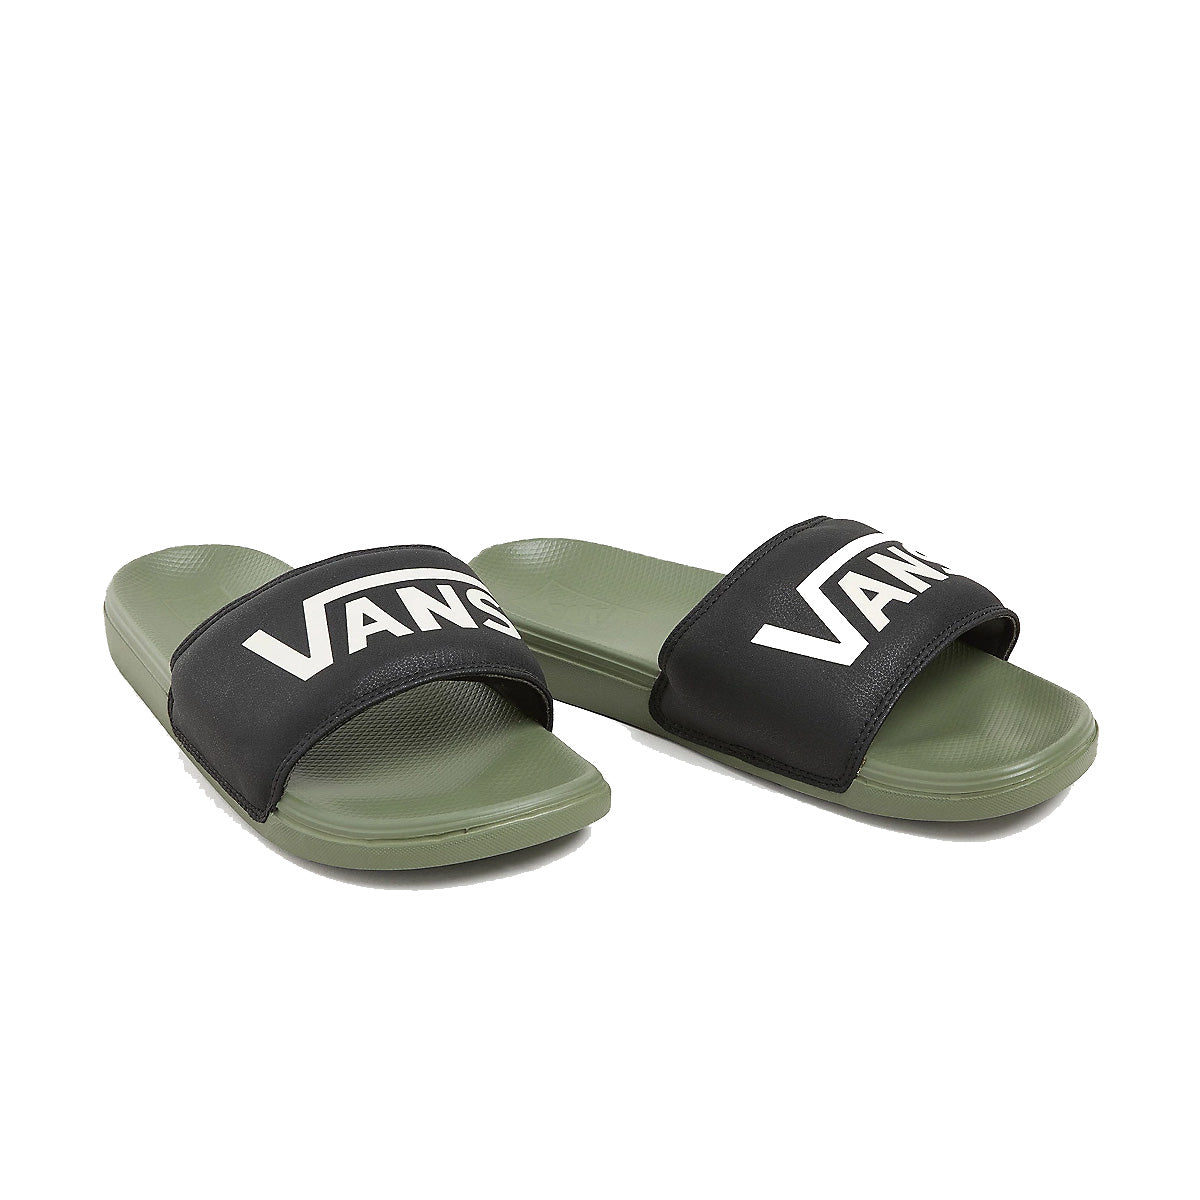 Olive green vans sliders with black strap and white vans logo. Free uk shipping over £50